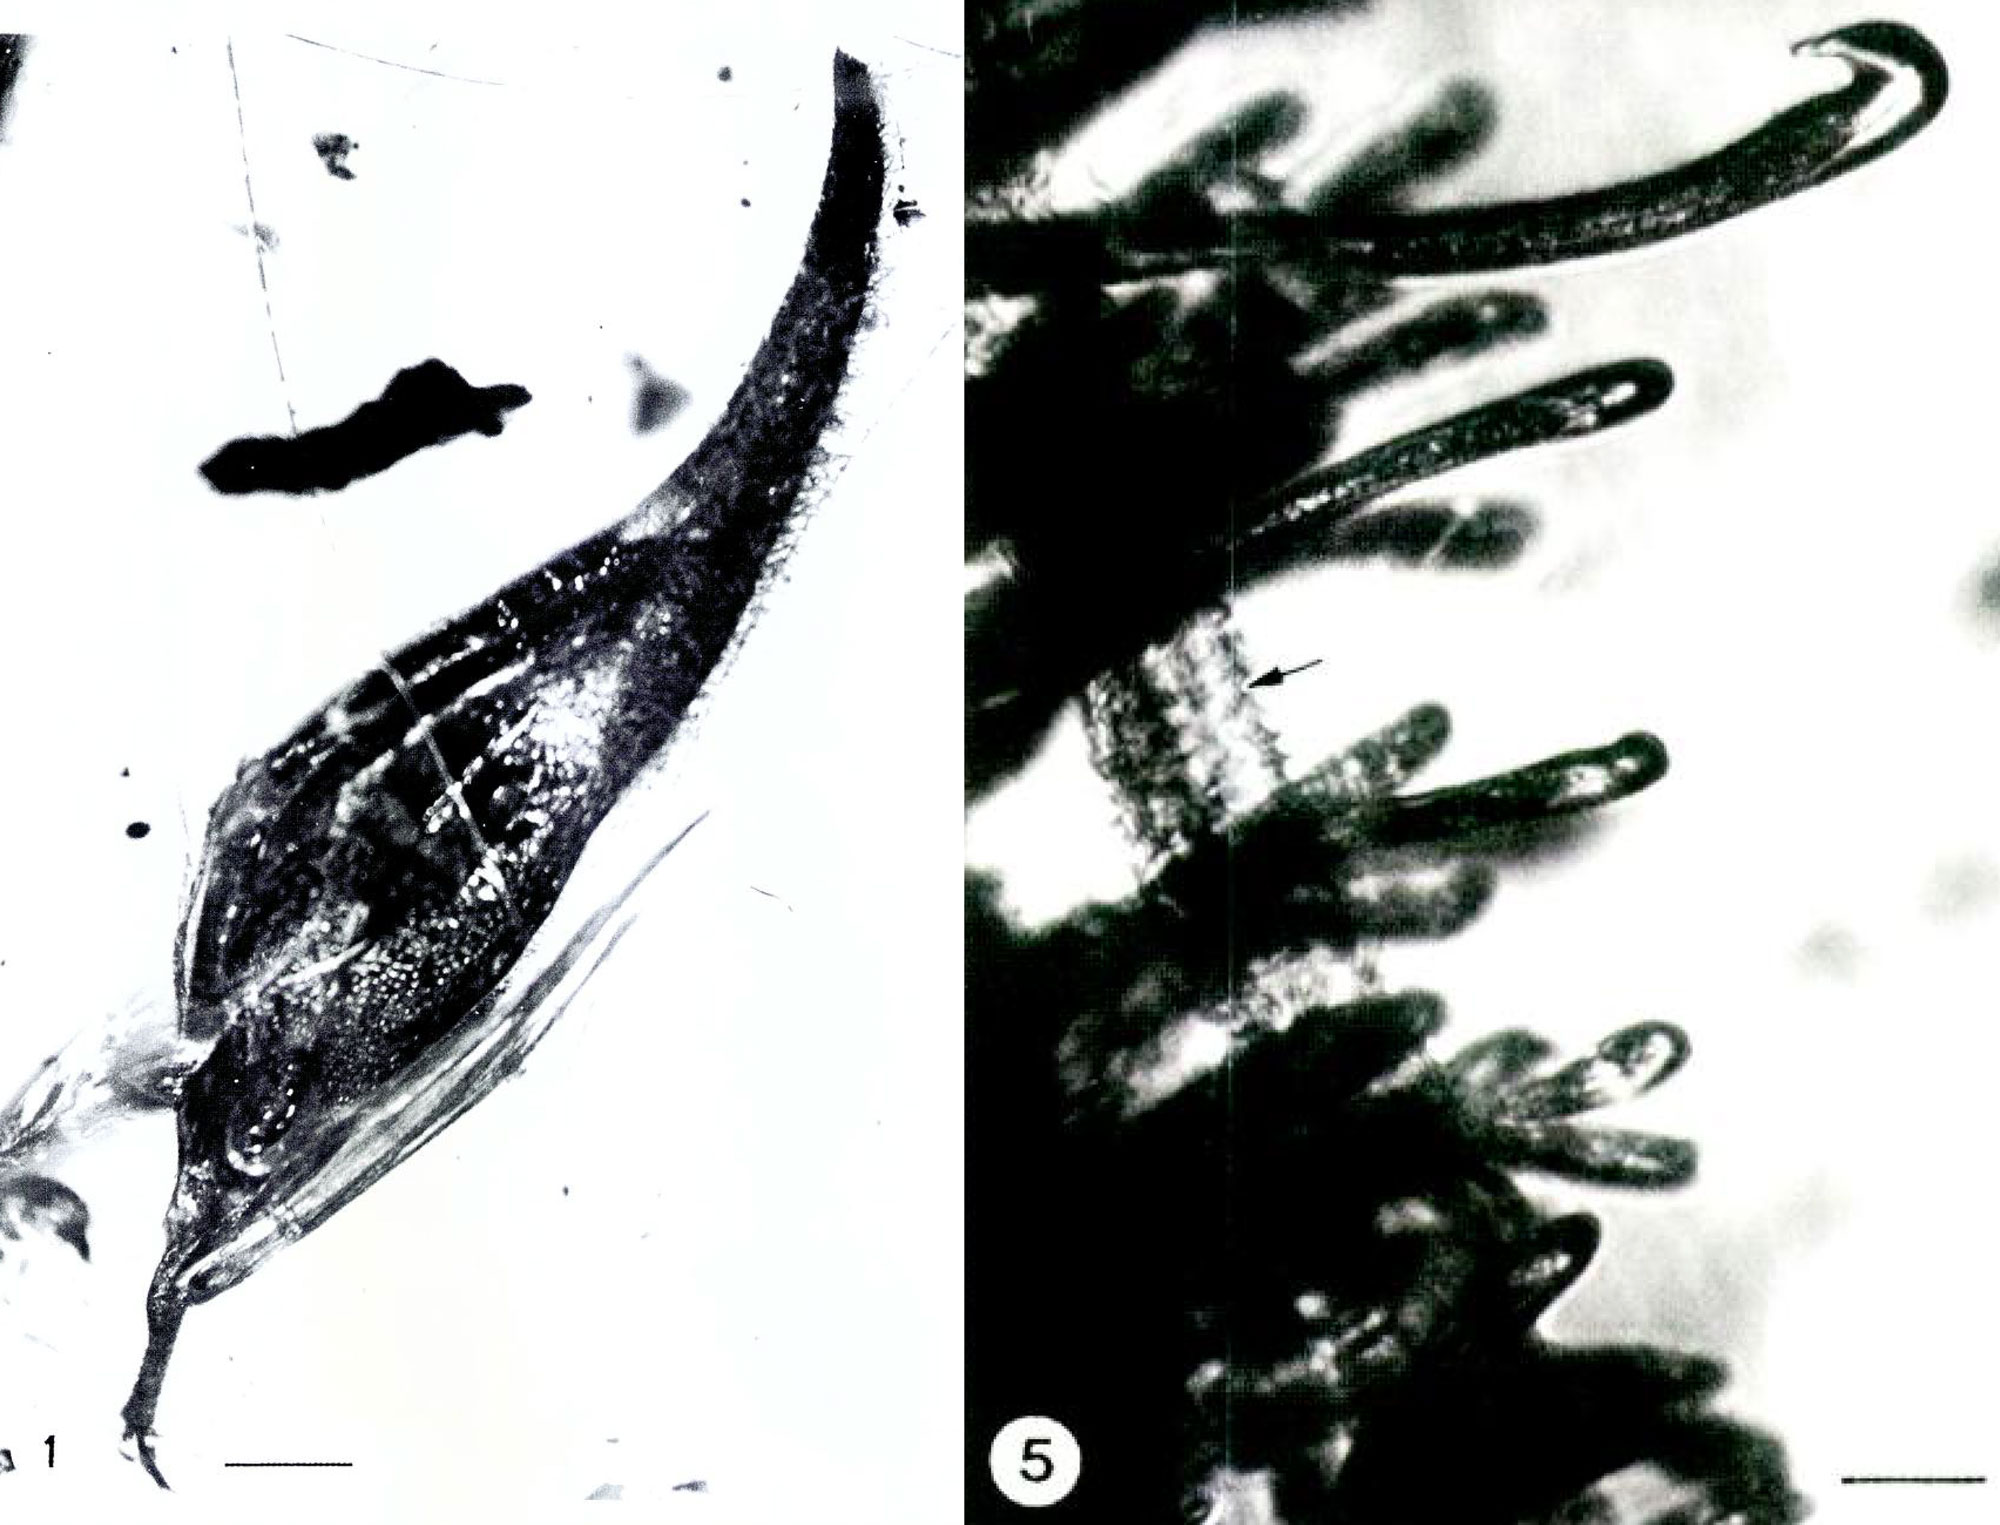 2-panel image showing black and white photos of a spikelet of stalkgrass preserved in Miocene Dominican amber. Left panel: Photograph of the entire spikelet, which is roughly triangular in shape. Right panel: Detail of the hairs covering the outside of the spikelet. The hairs have hooked ends.